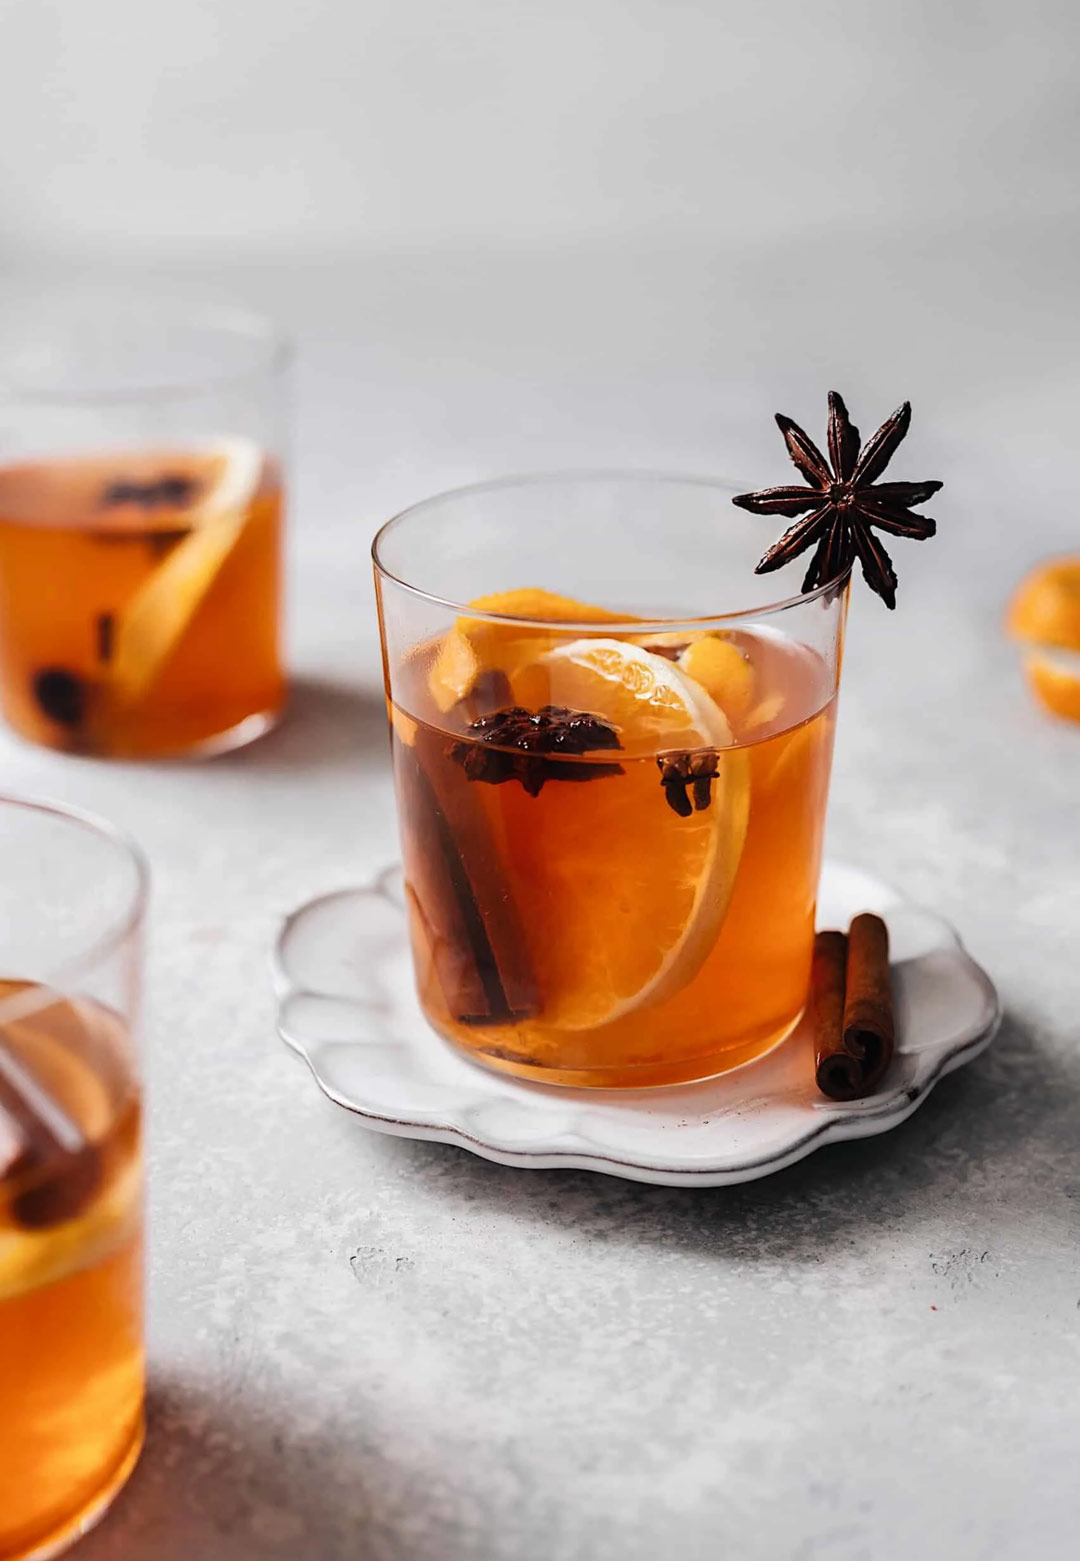 Winter warming mulled cider receipe for your Christmas season with orange and cinnamon and star anise